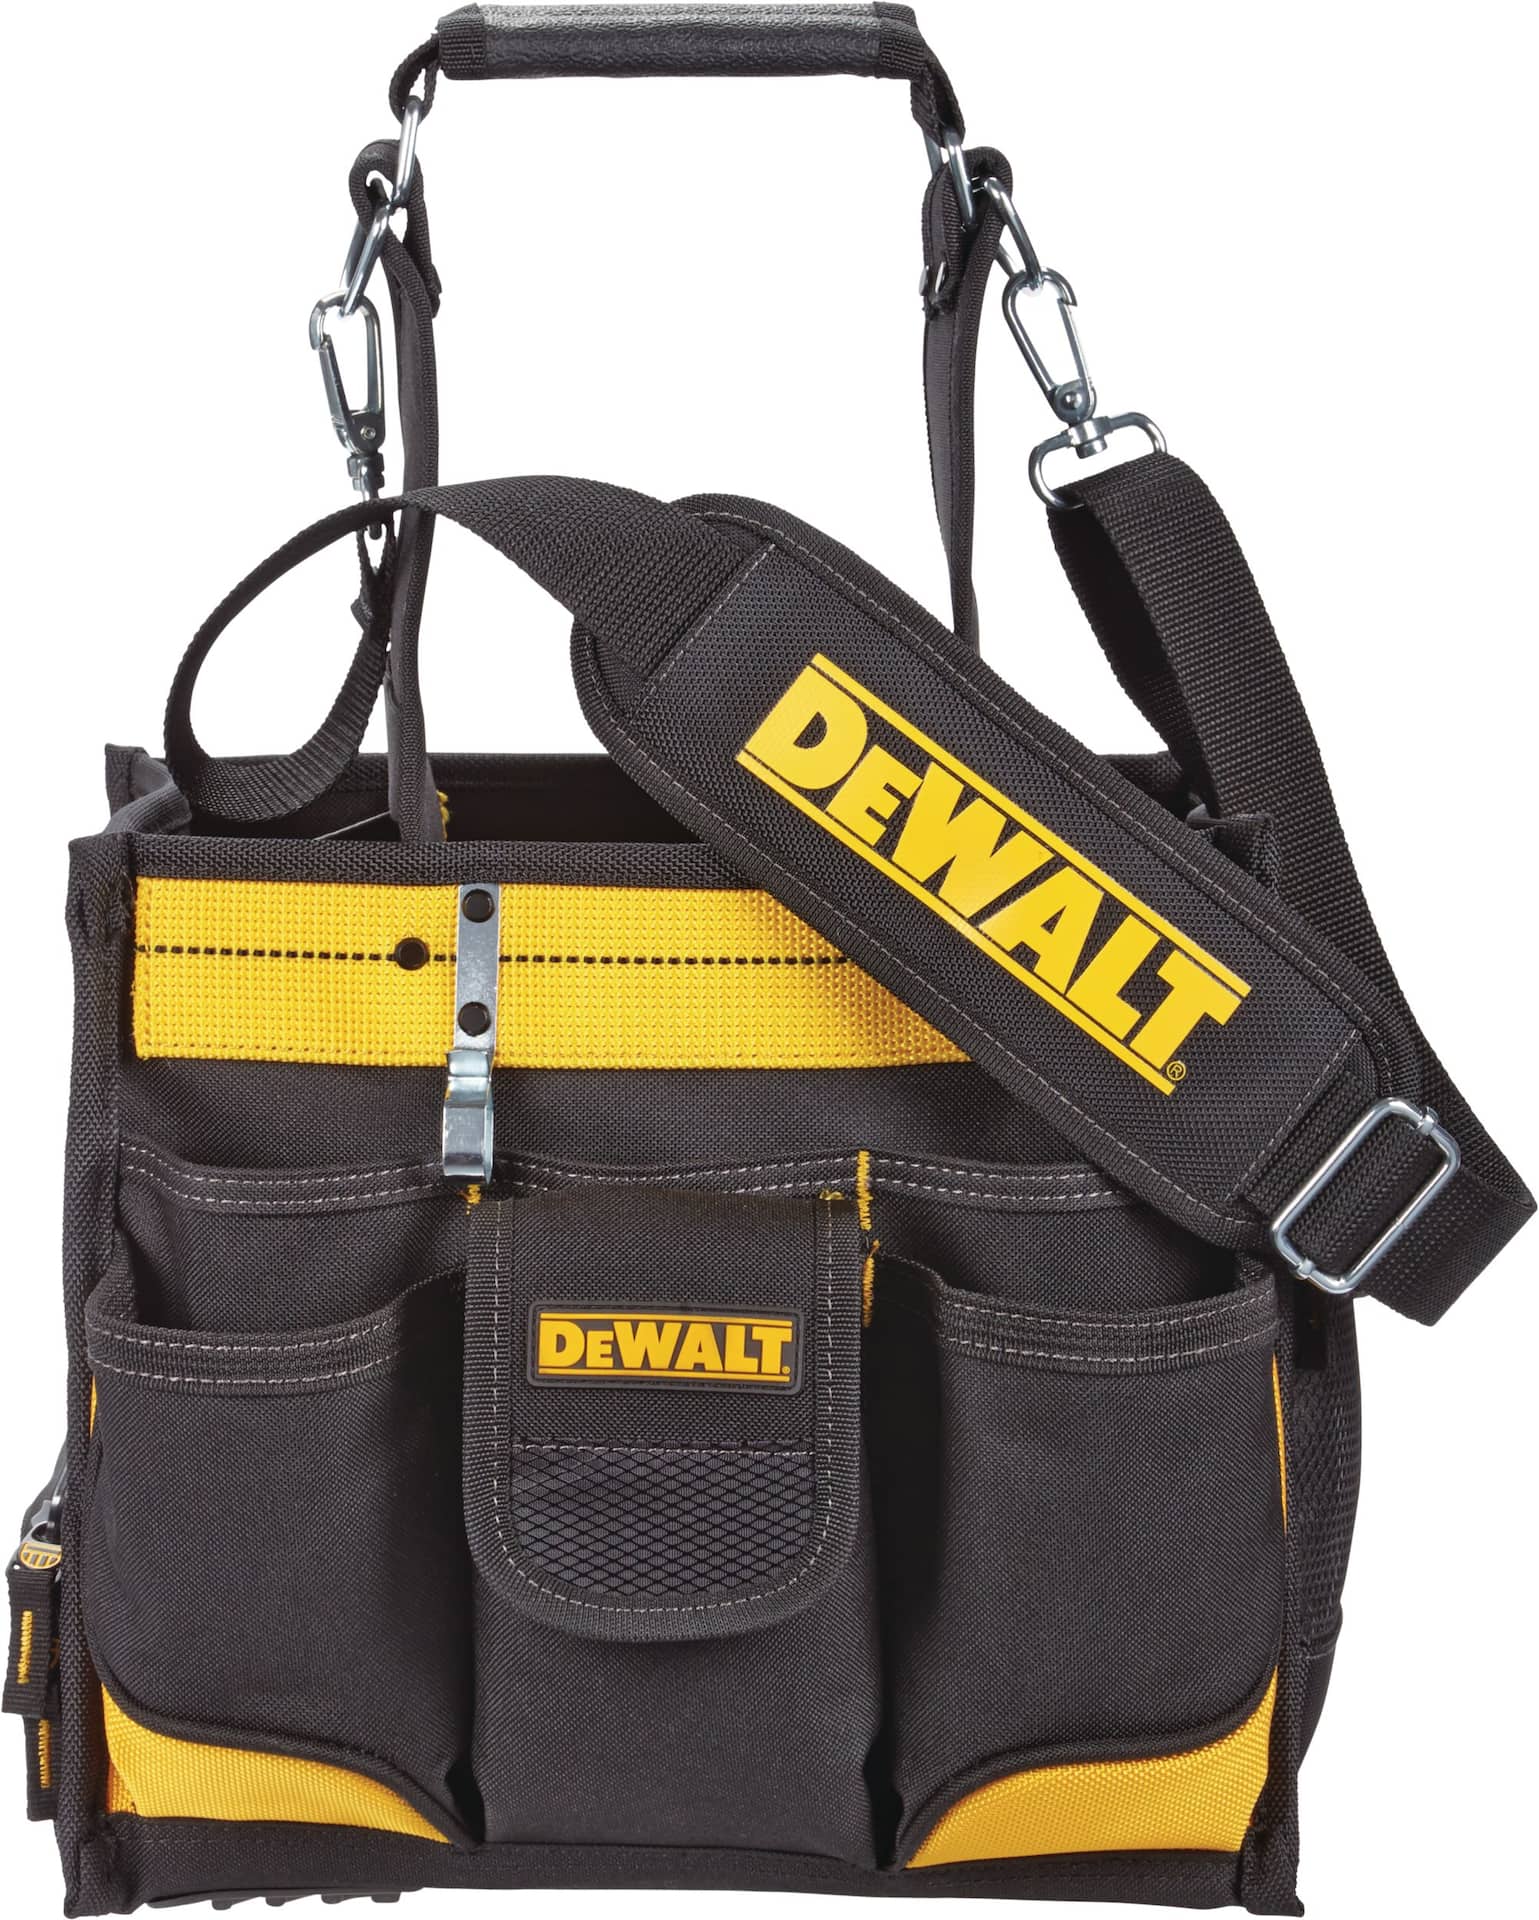 DEWALT Electrical  Maintenance Tool Bag w/ Parts Tray, 23 Pockets, 11-in  Canadian Tire